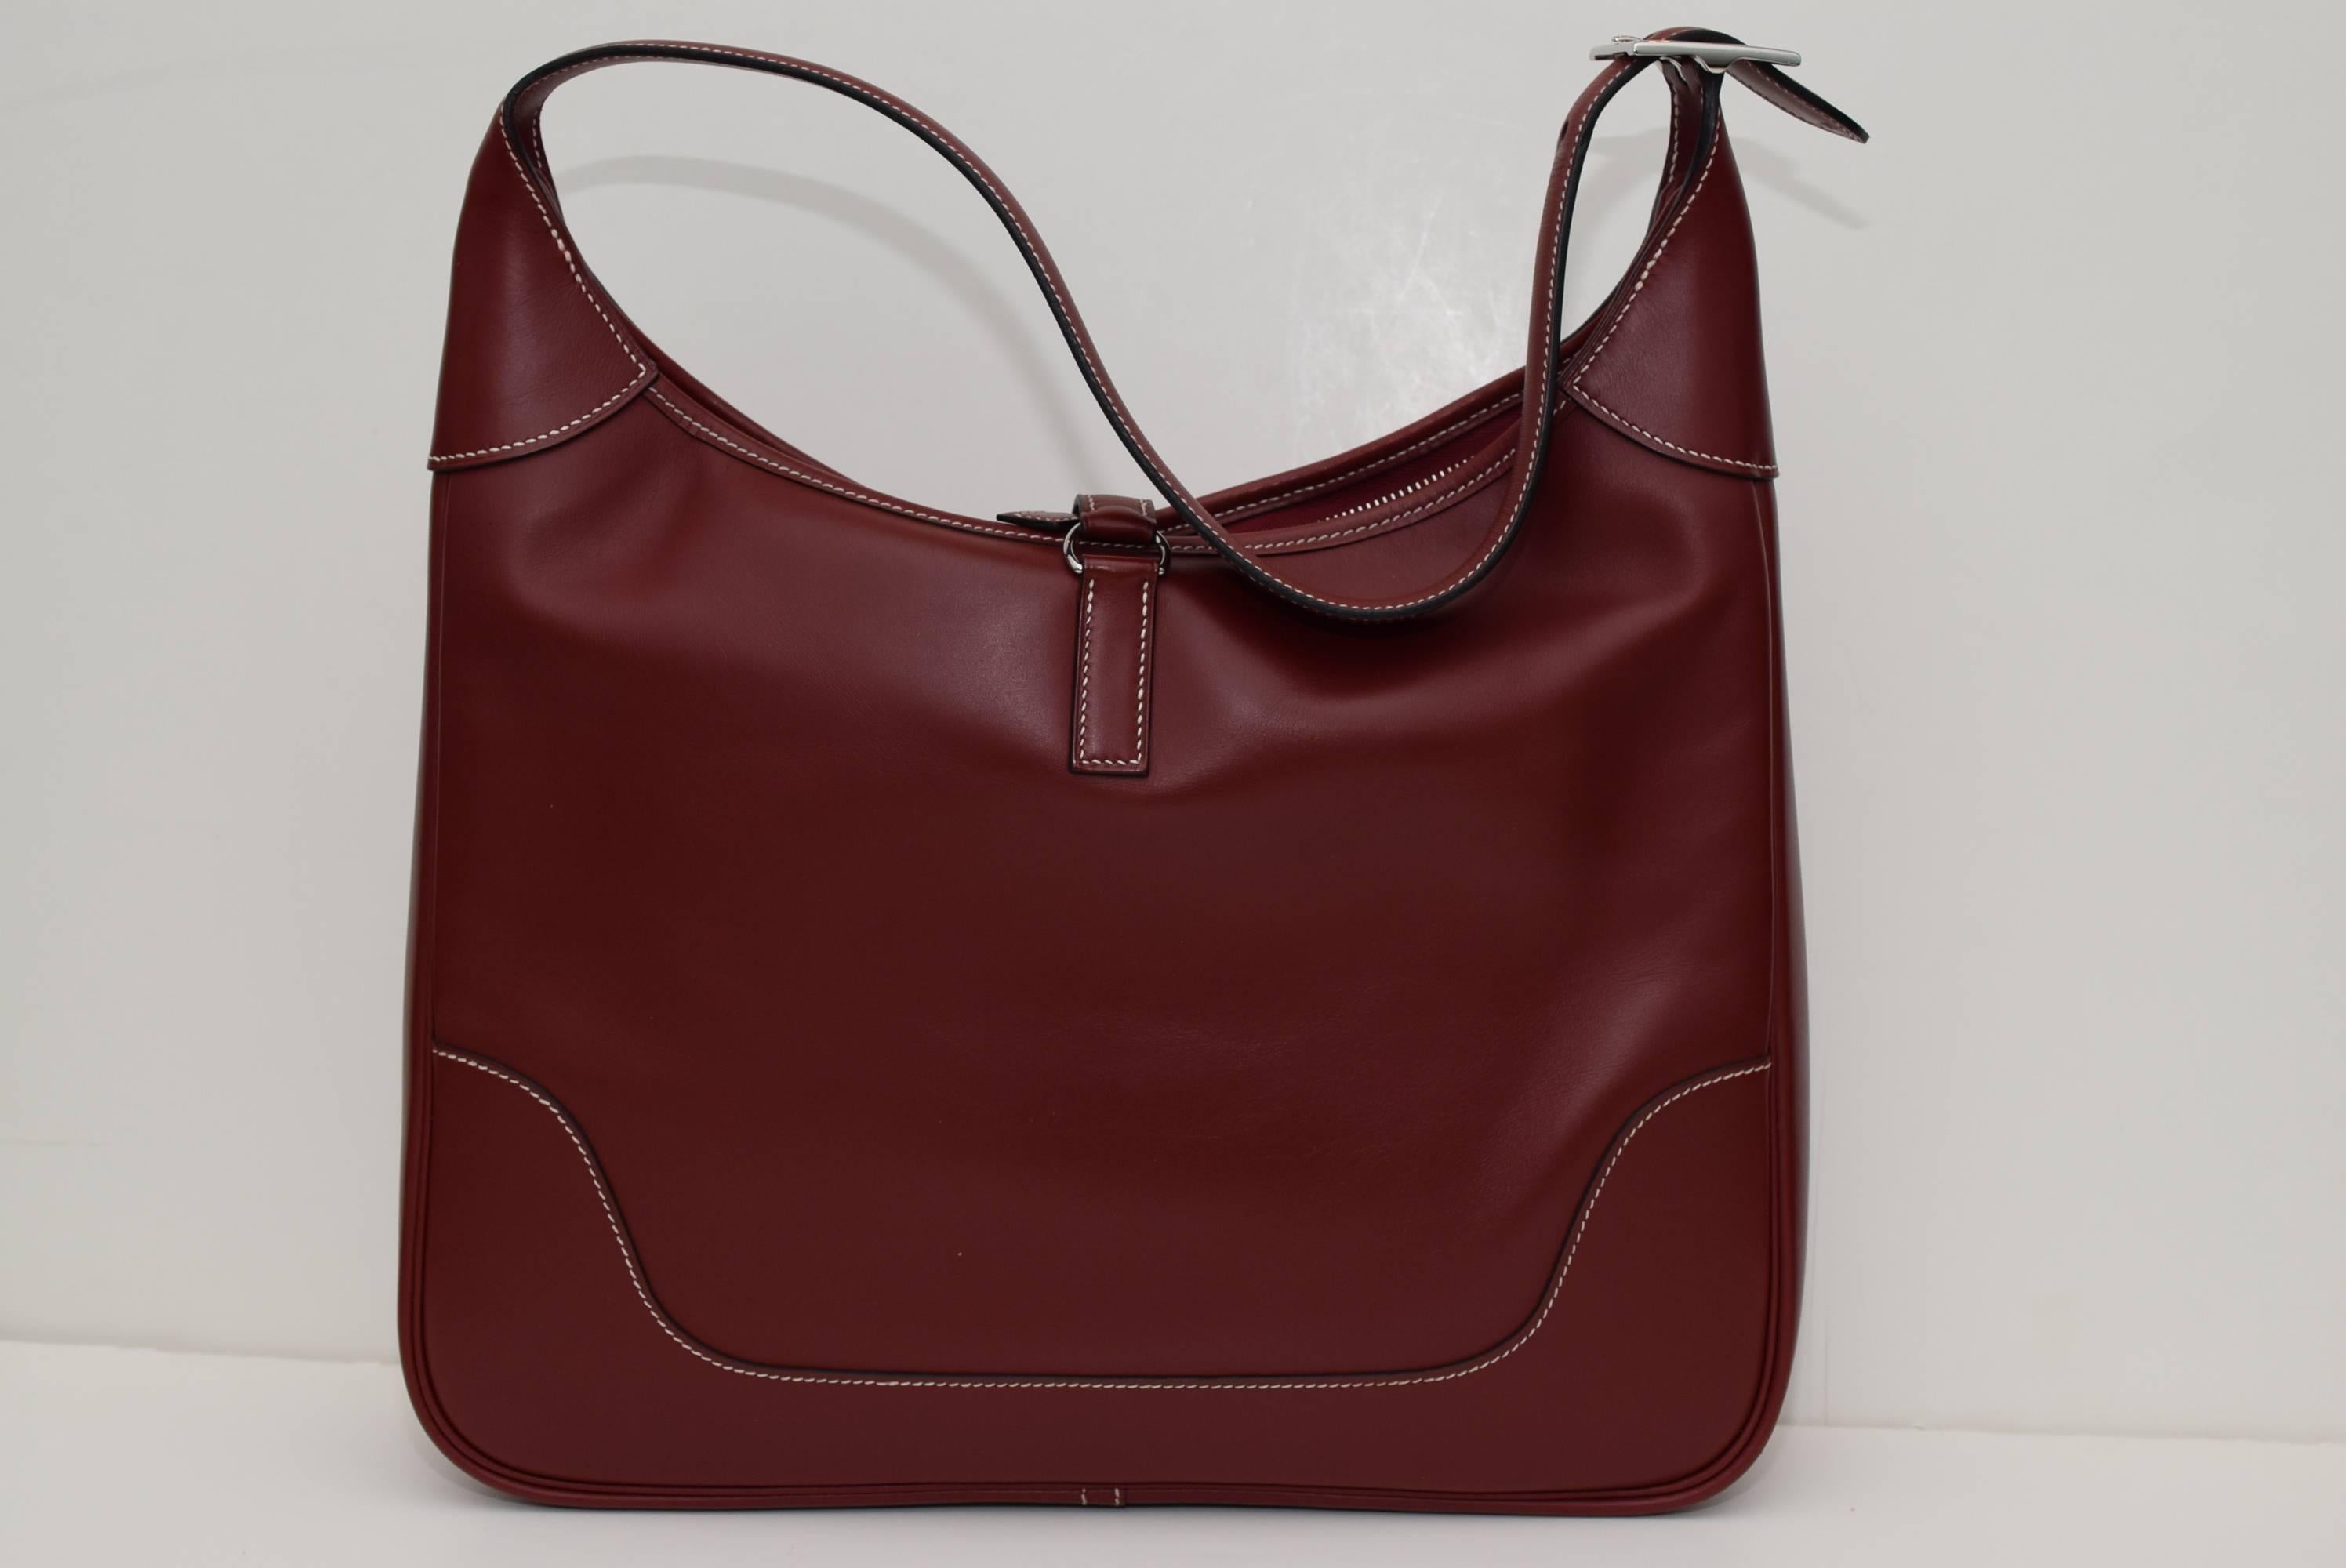 Made in France, this beautiful Hermes Le Trim 12 X 10 X 3 Burgundy will take you anywhere.  Pebble leather trim shoulder bag with 11